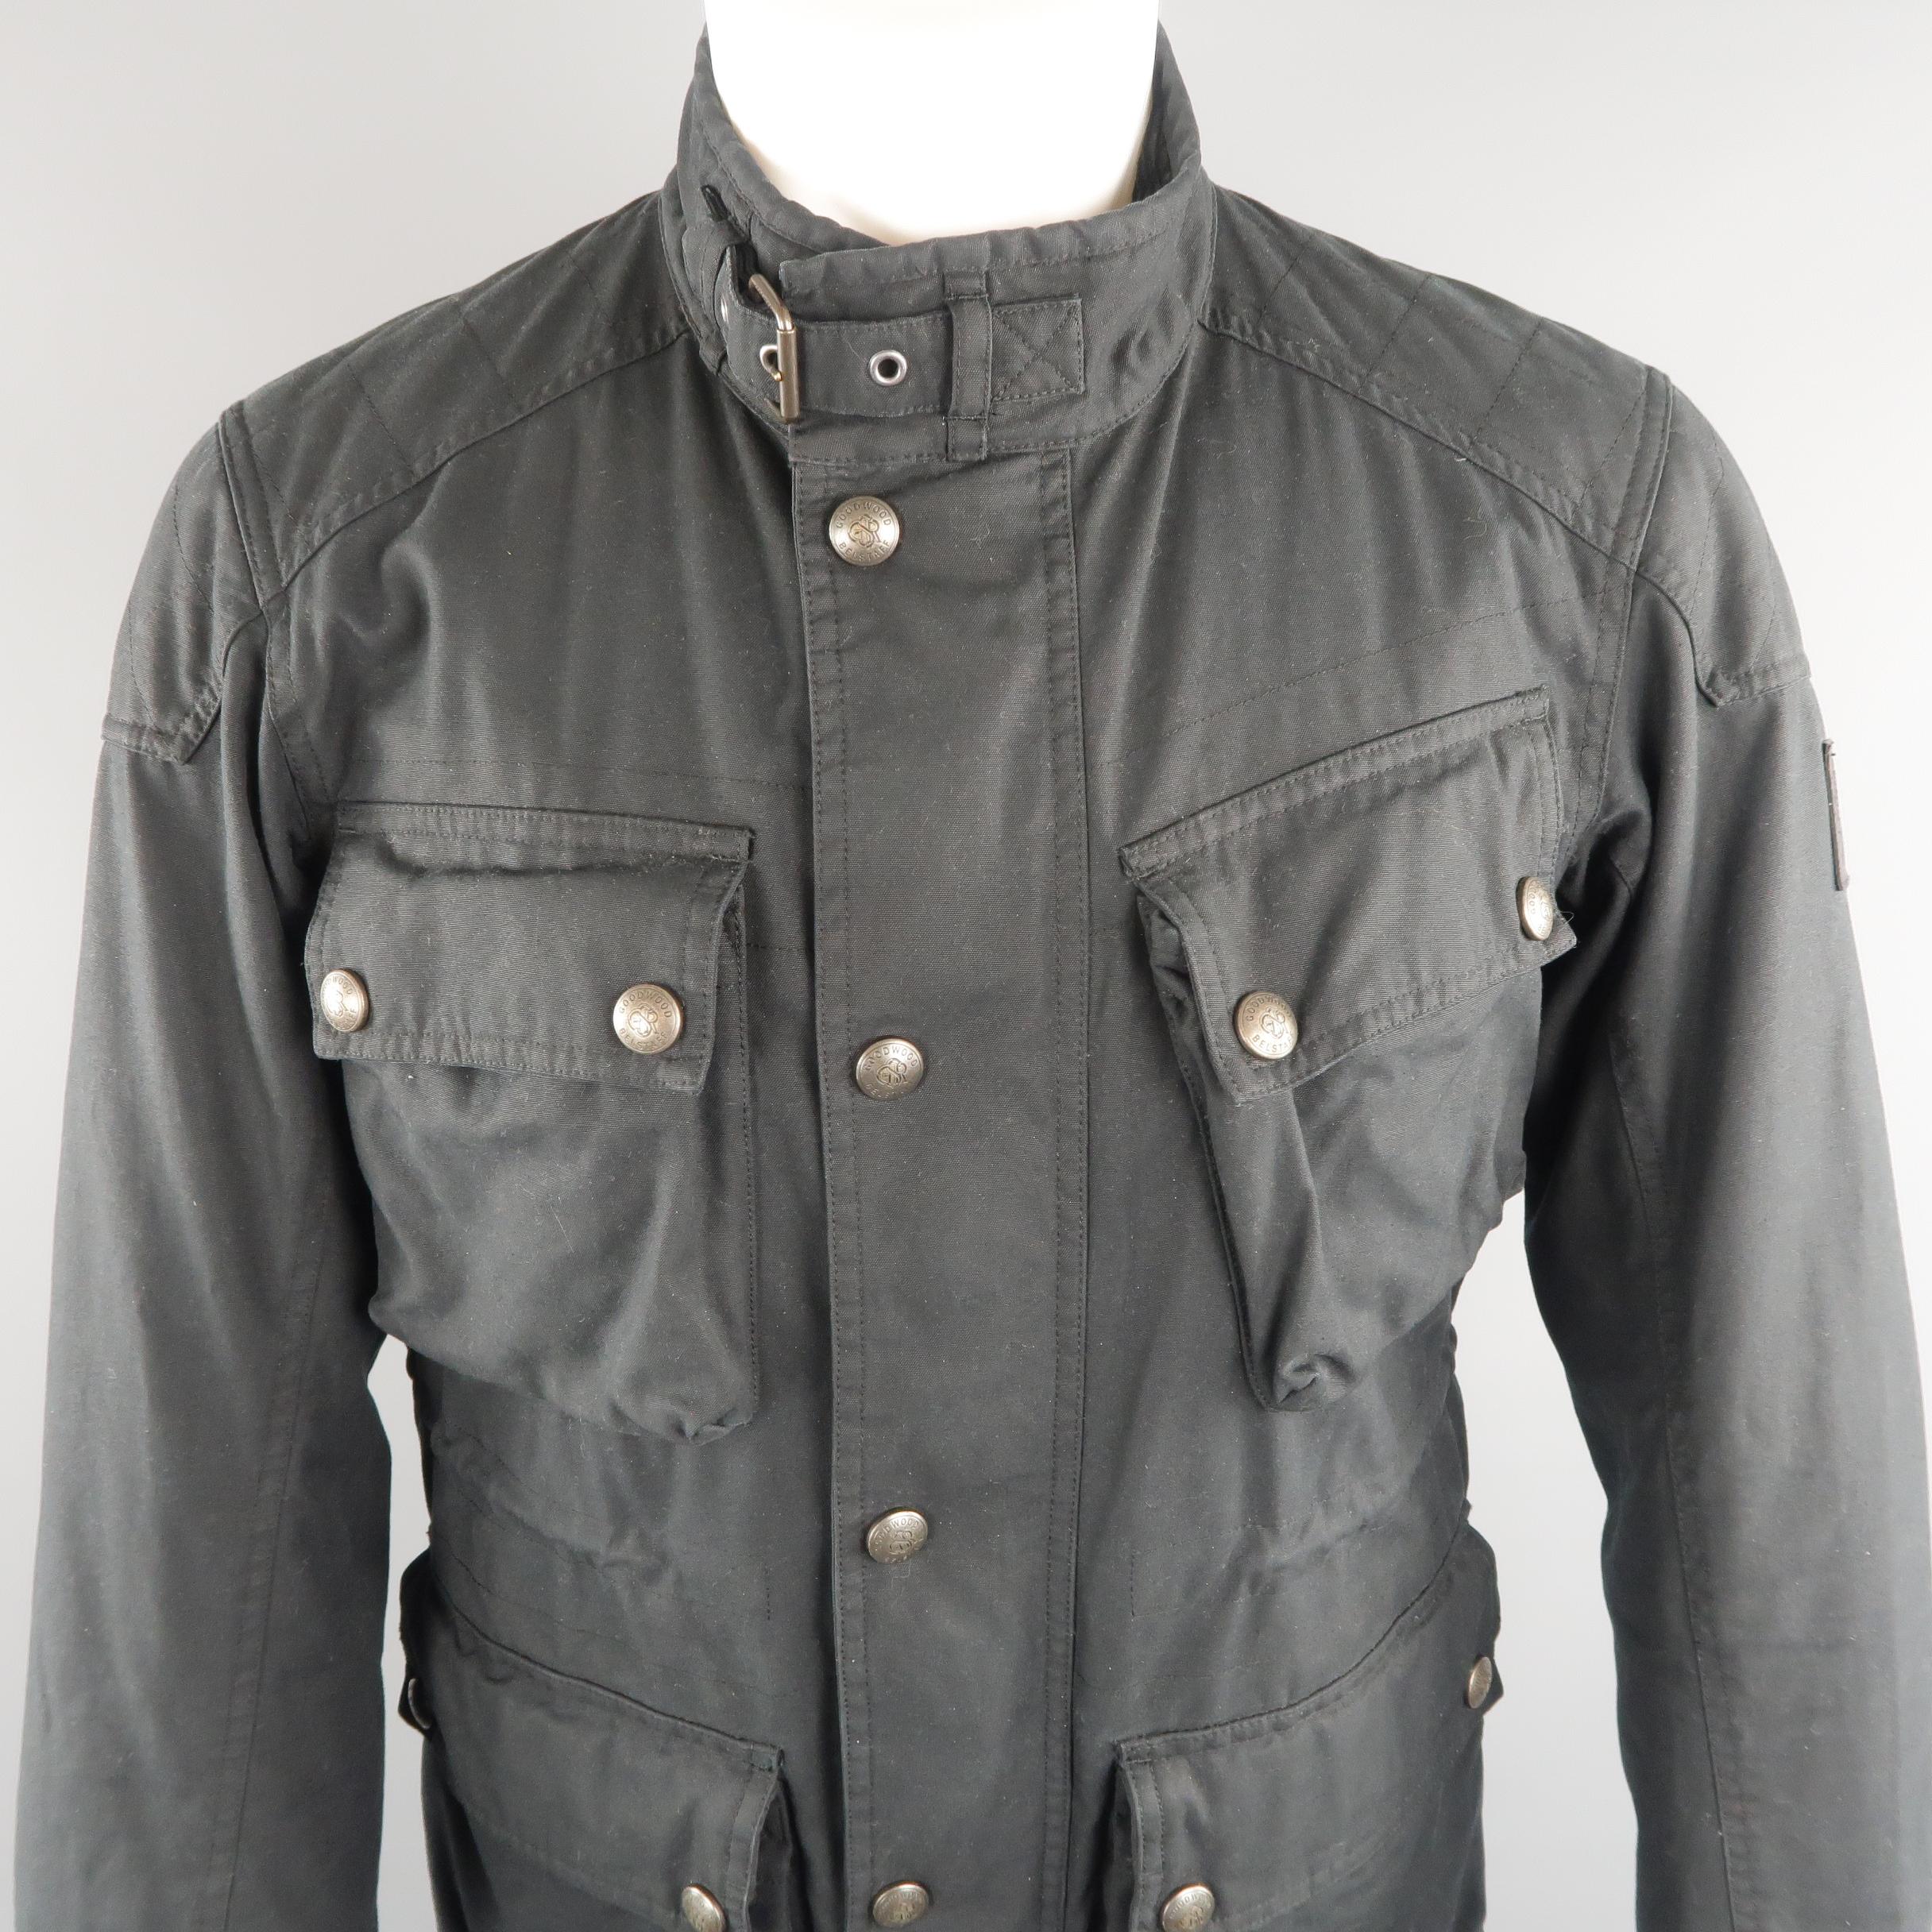 BELSTAFF goodwood sport and racing  jacket, come in black tone in solid cotton with multiple cargo pockets, patches, zip & snaps, belt and corduroy collar and lateral patched label.   
 
Good Pre-Owned Condition.
Marked: no size
 
Measurements:
